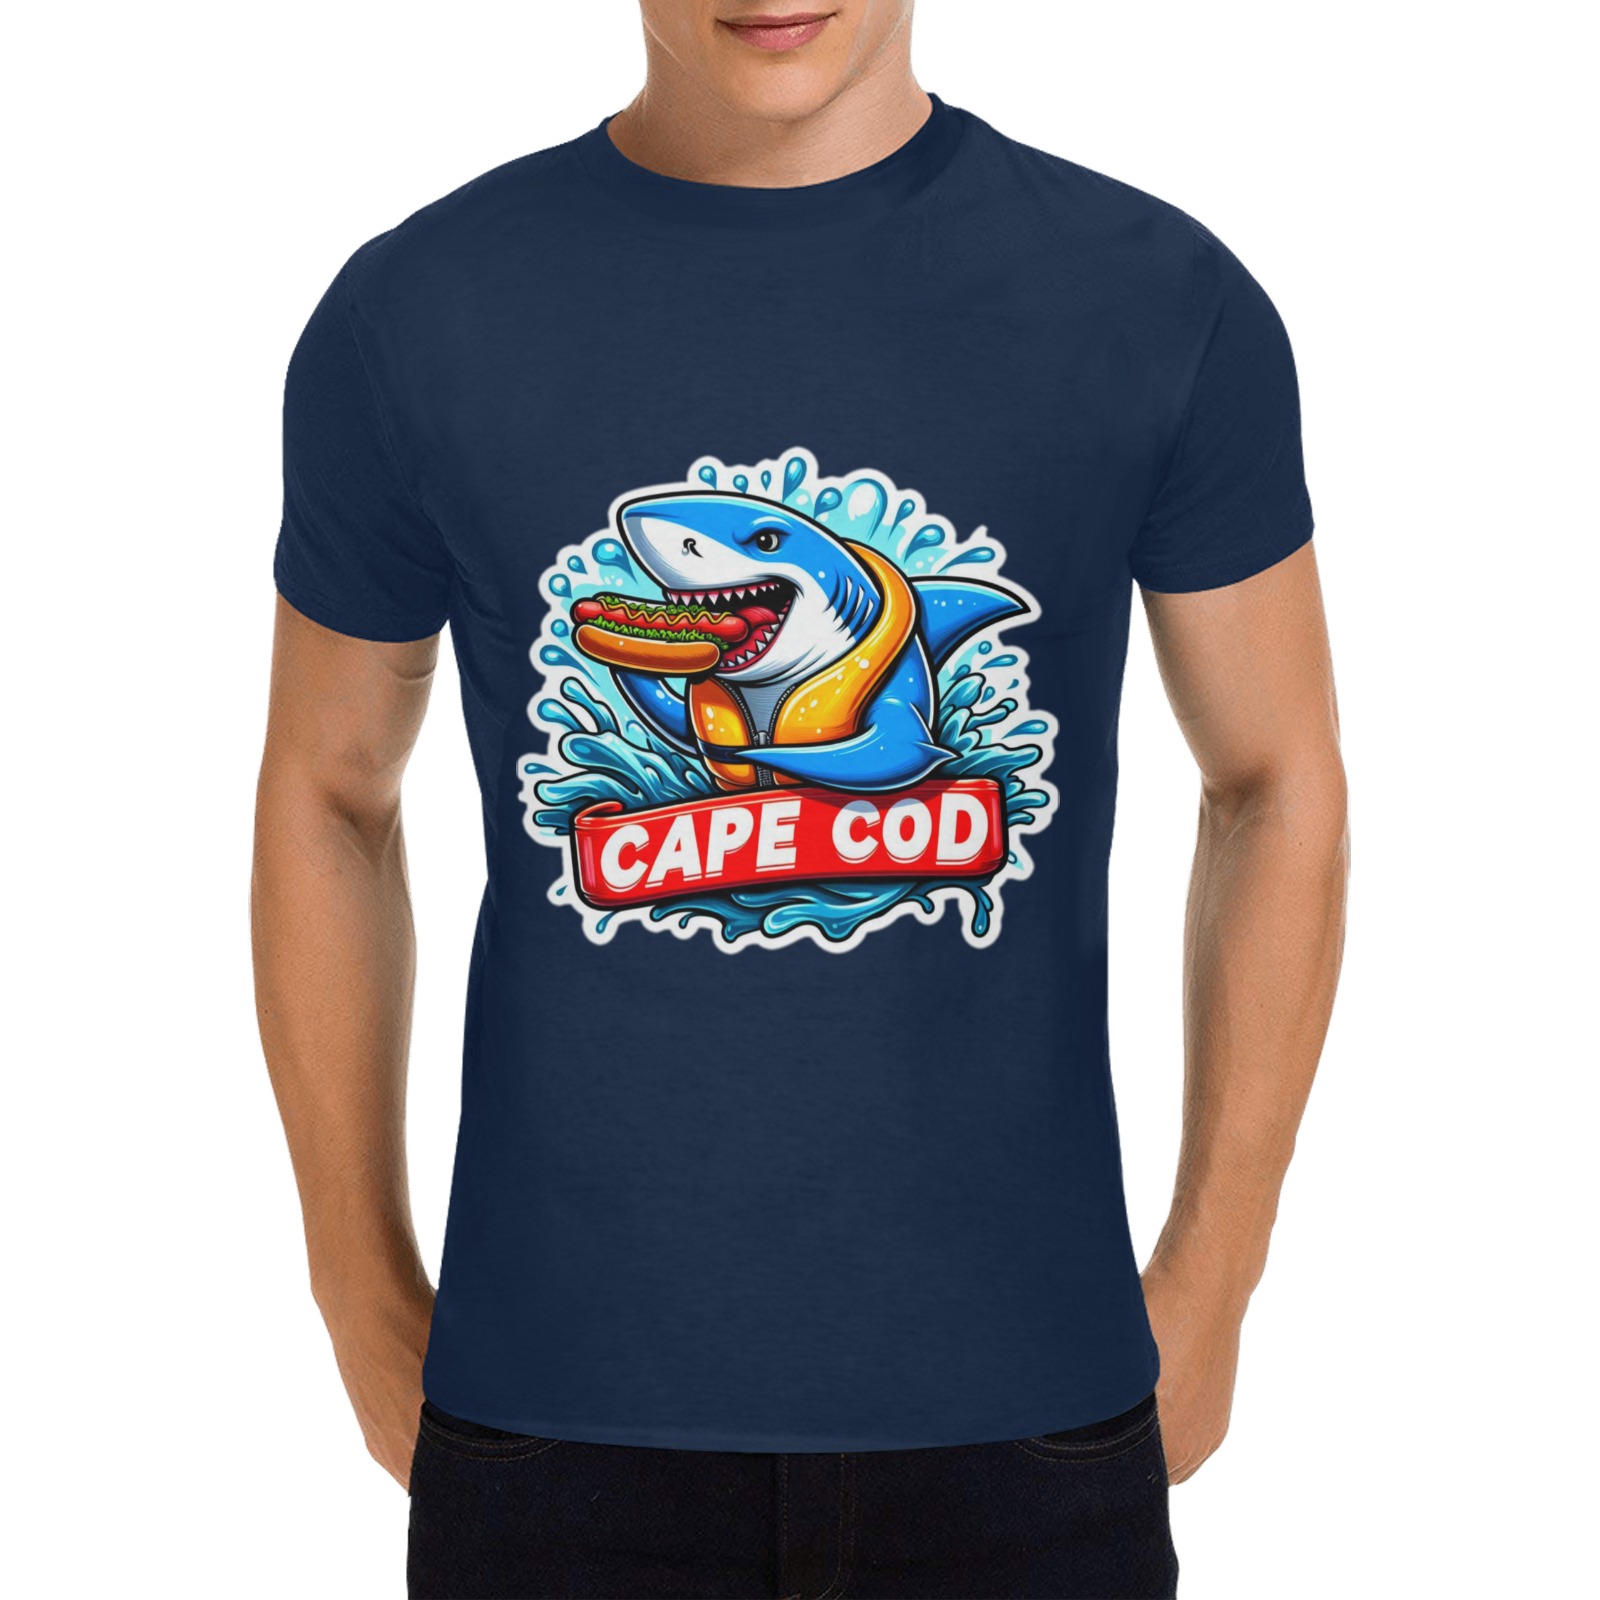 CAPE COD-GREAT WHITE EATING HOT DOG 3 Men's T-Shirt in USA Size (Two Sides Printing)